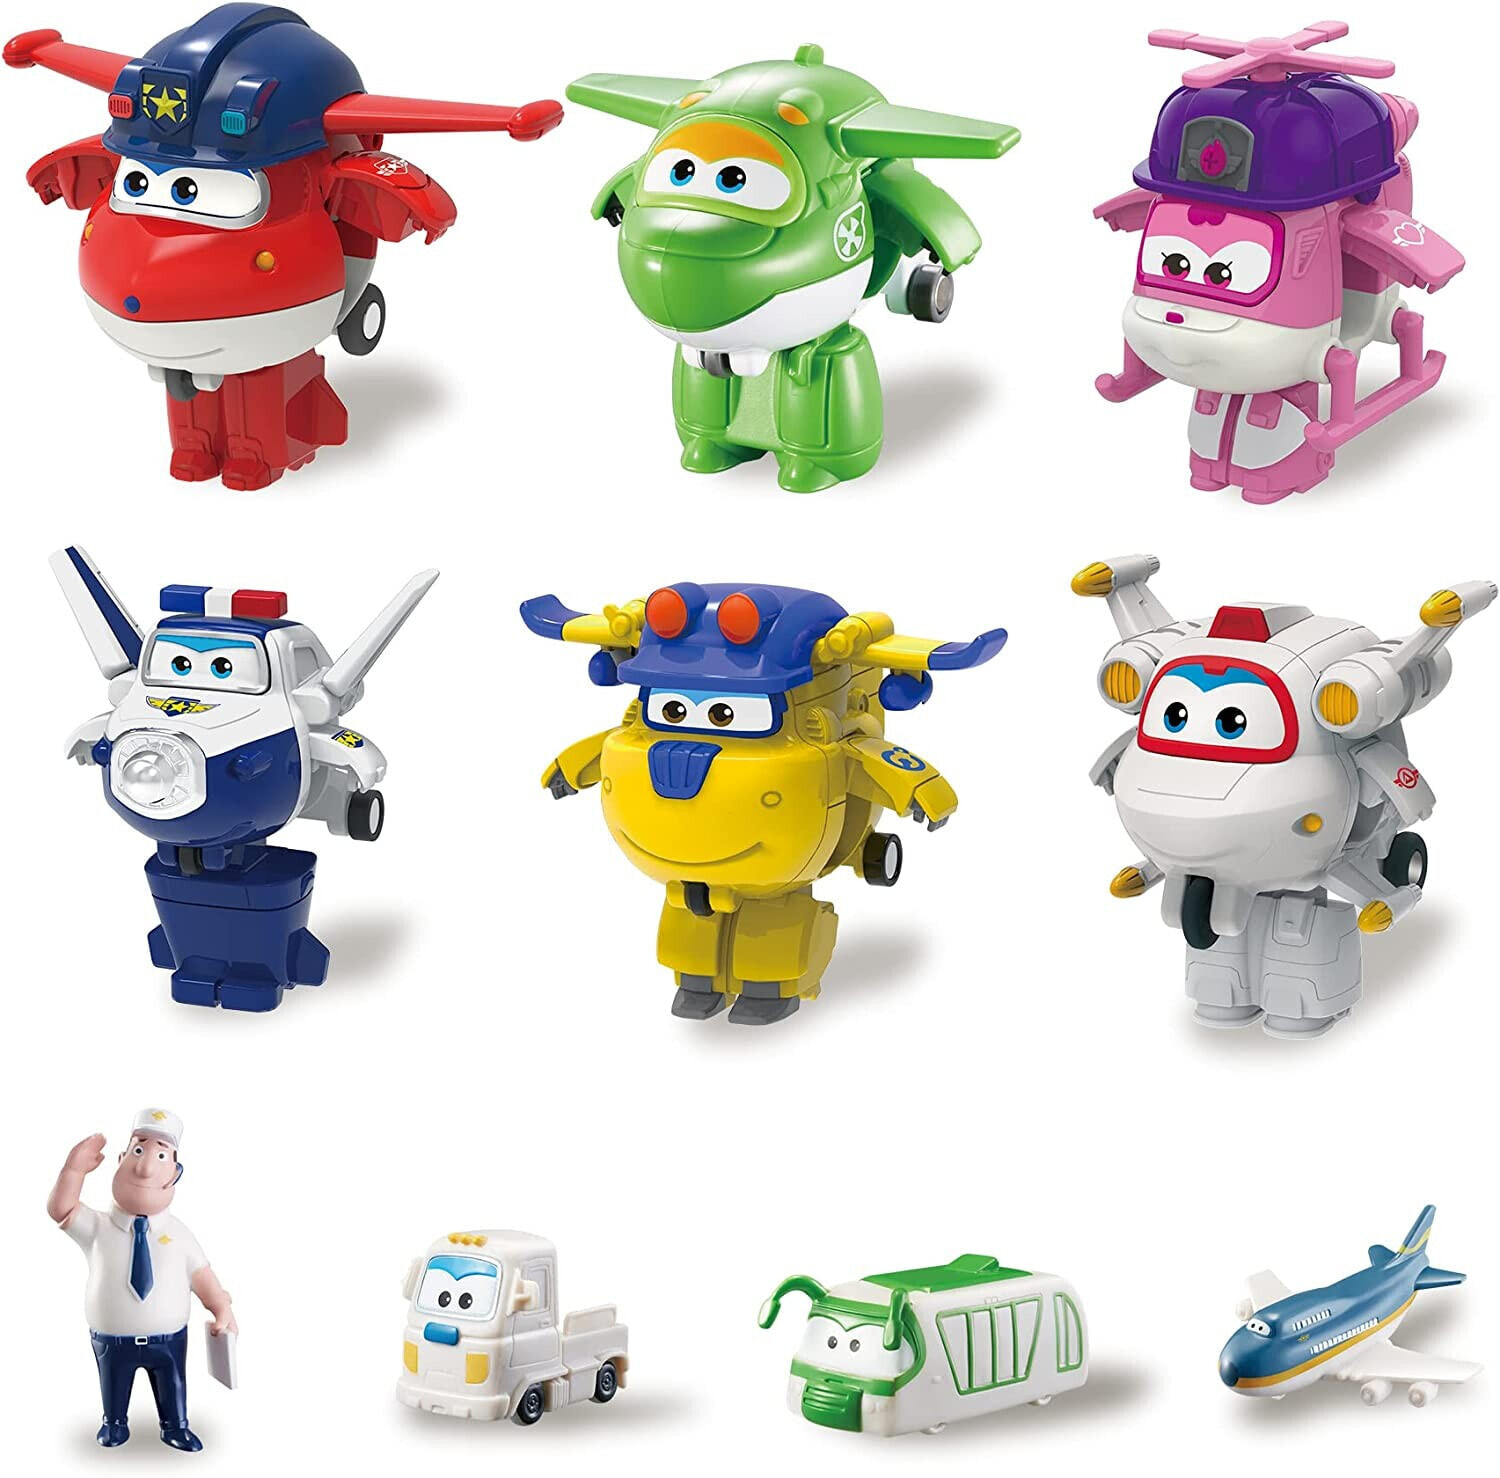 Super Wings - Tranform-a-bots x6 + PVC x4 figures - Convertible Play Planes and Robot Figures from the Super Wings Cartoon Series - Toy for Children from 3 Years